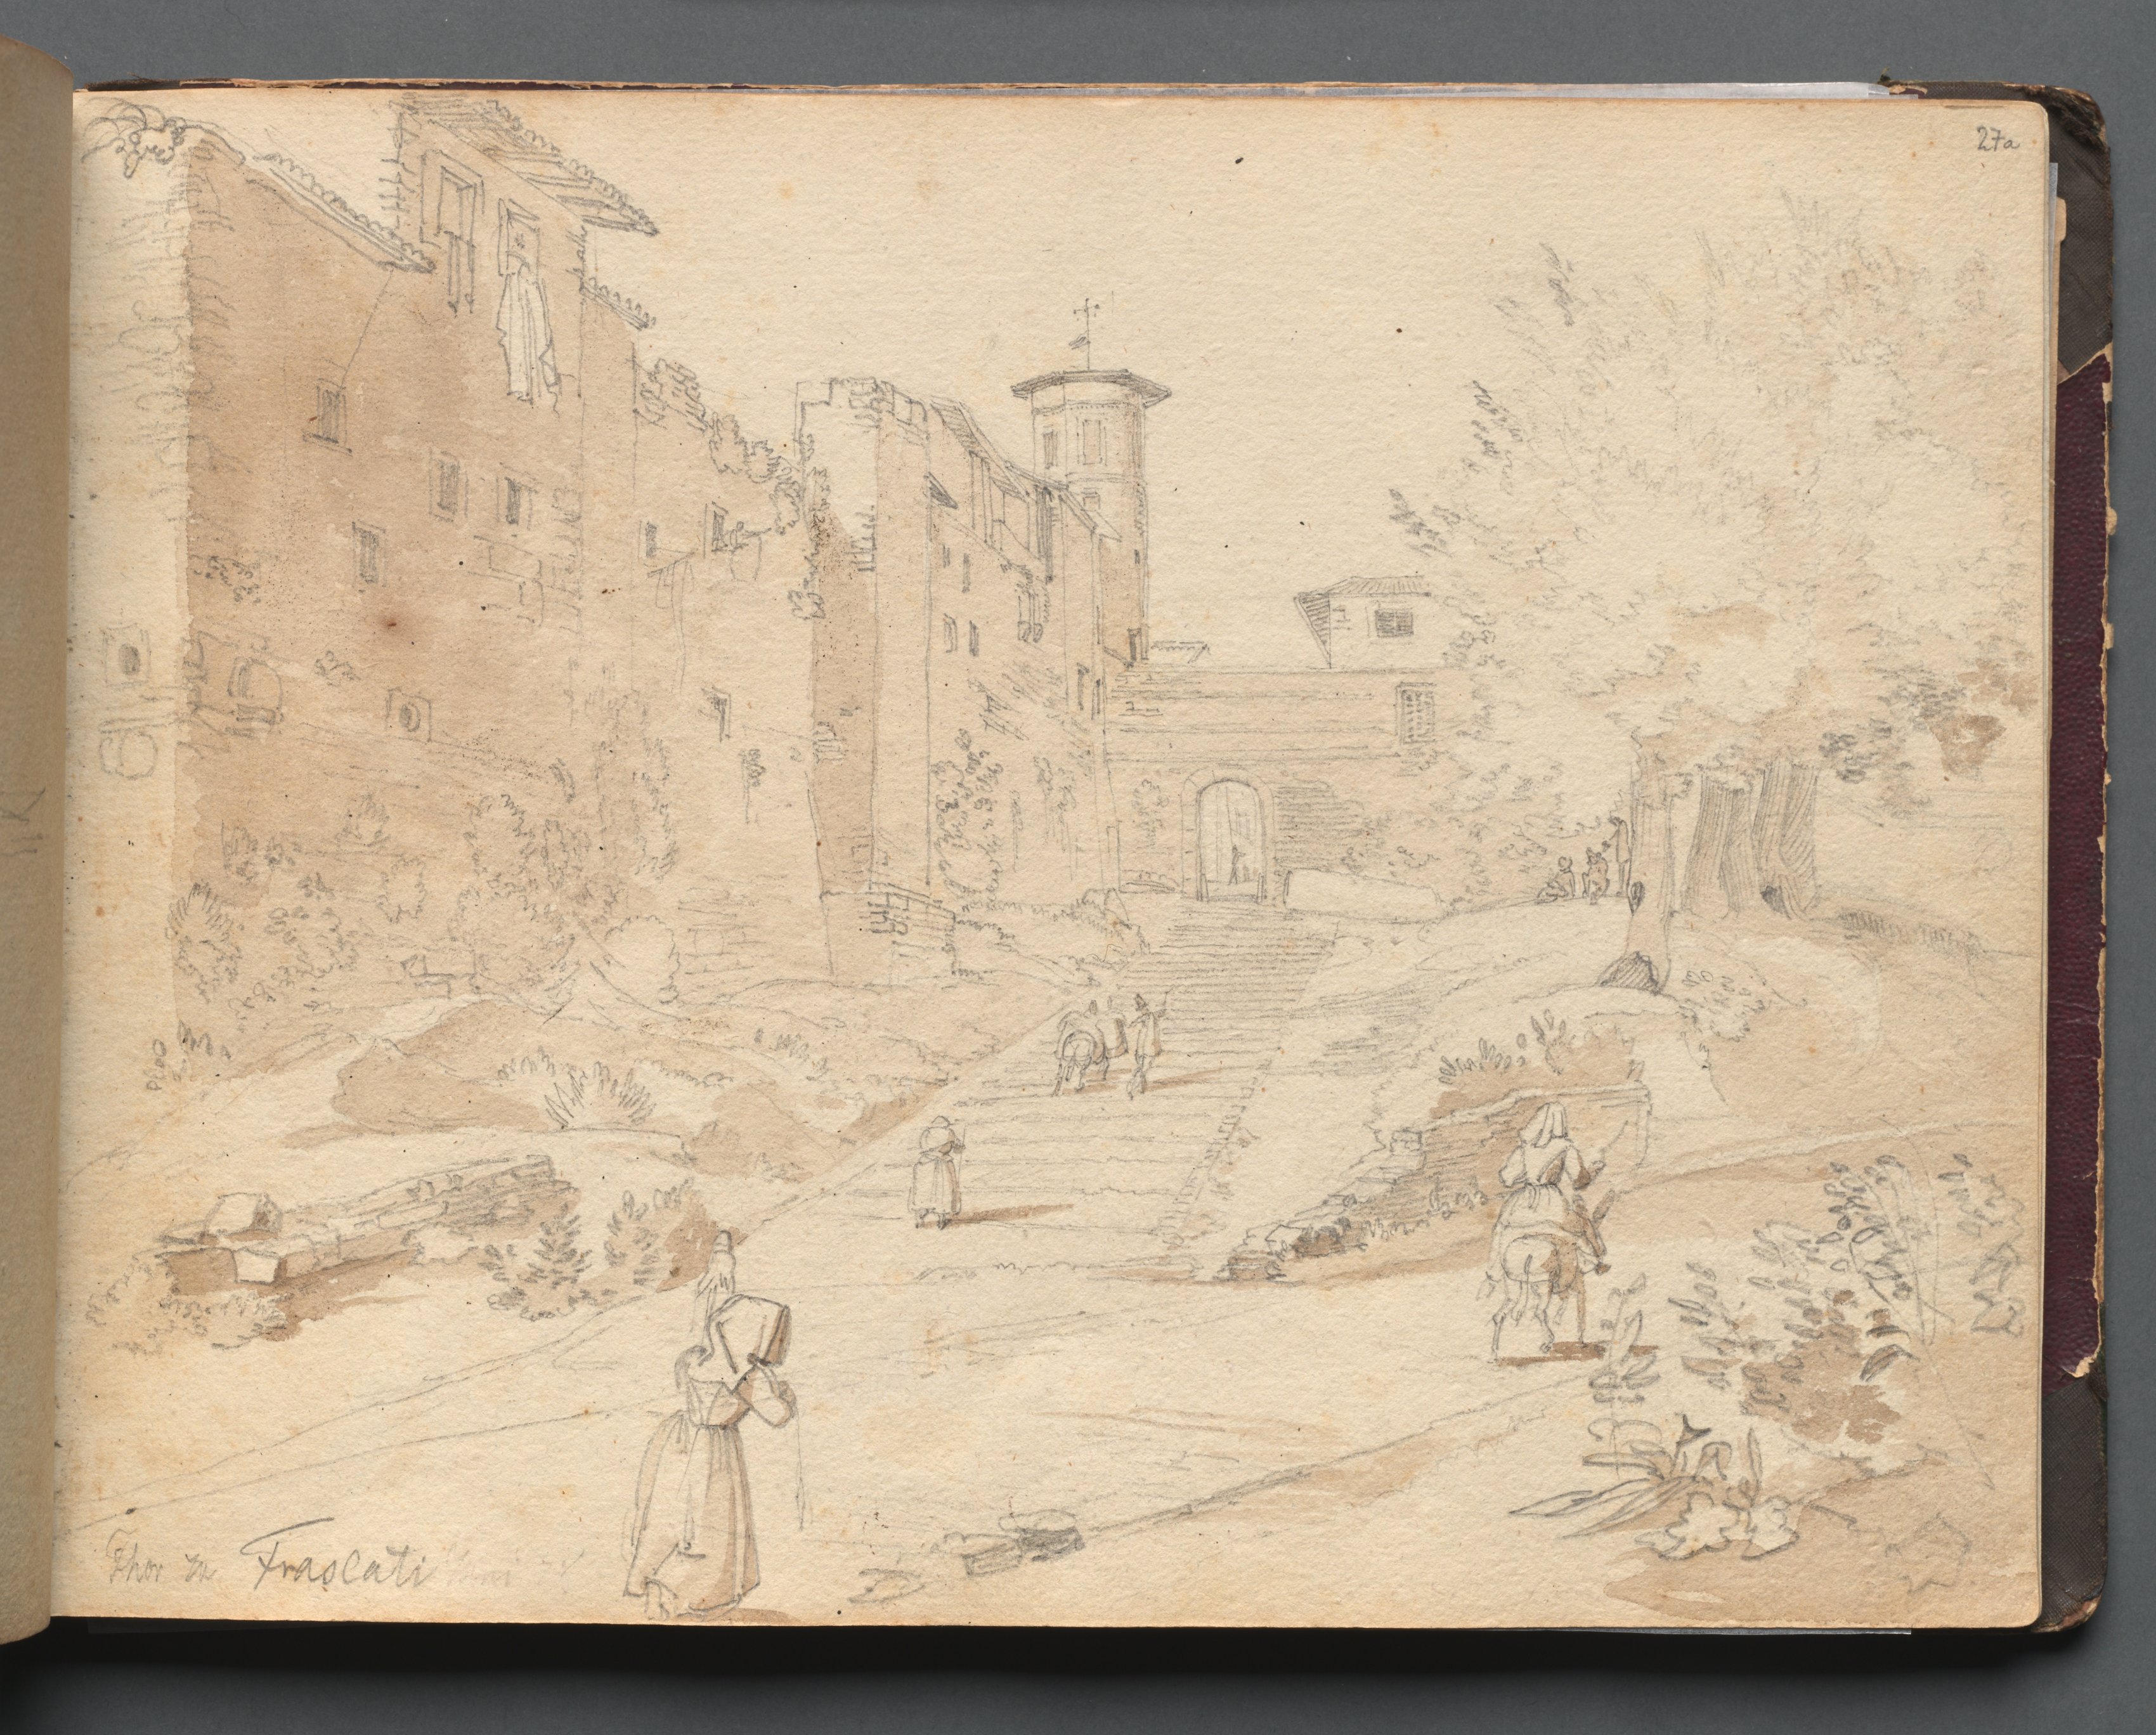 Album with Views of Rome and Surroundings, Landscape Studies, page 27a: "Frascati"